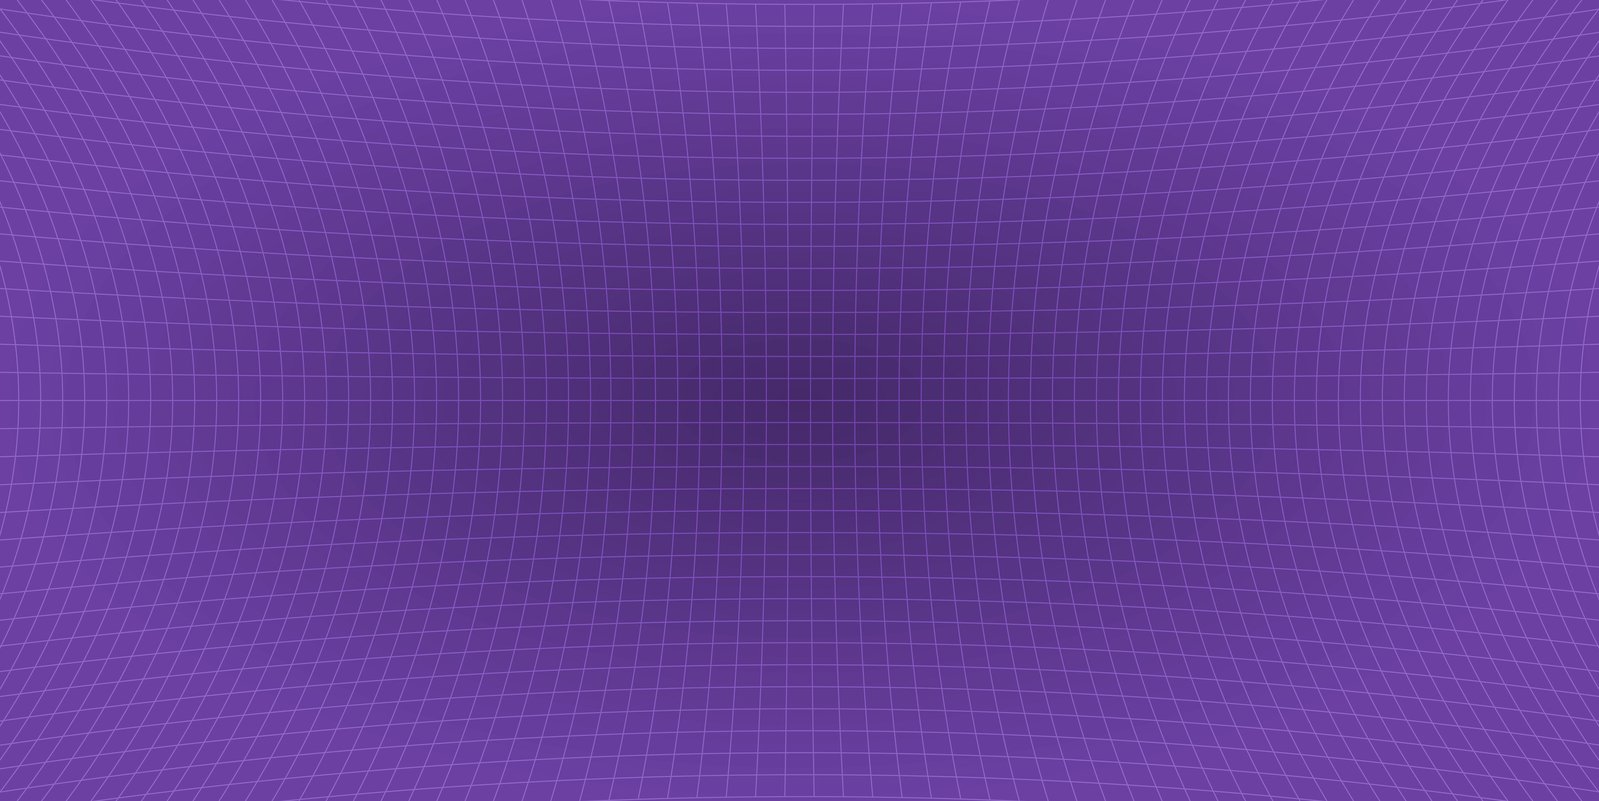 a purple pattern with black dots and lines